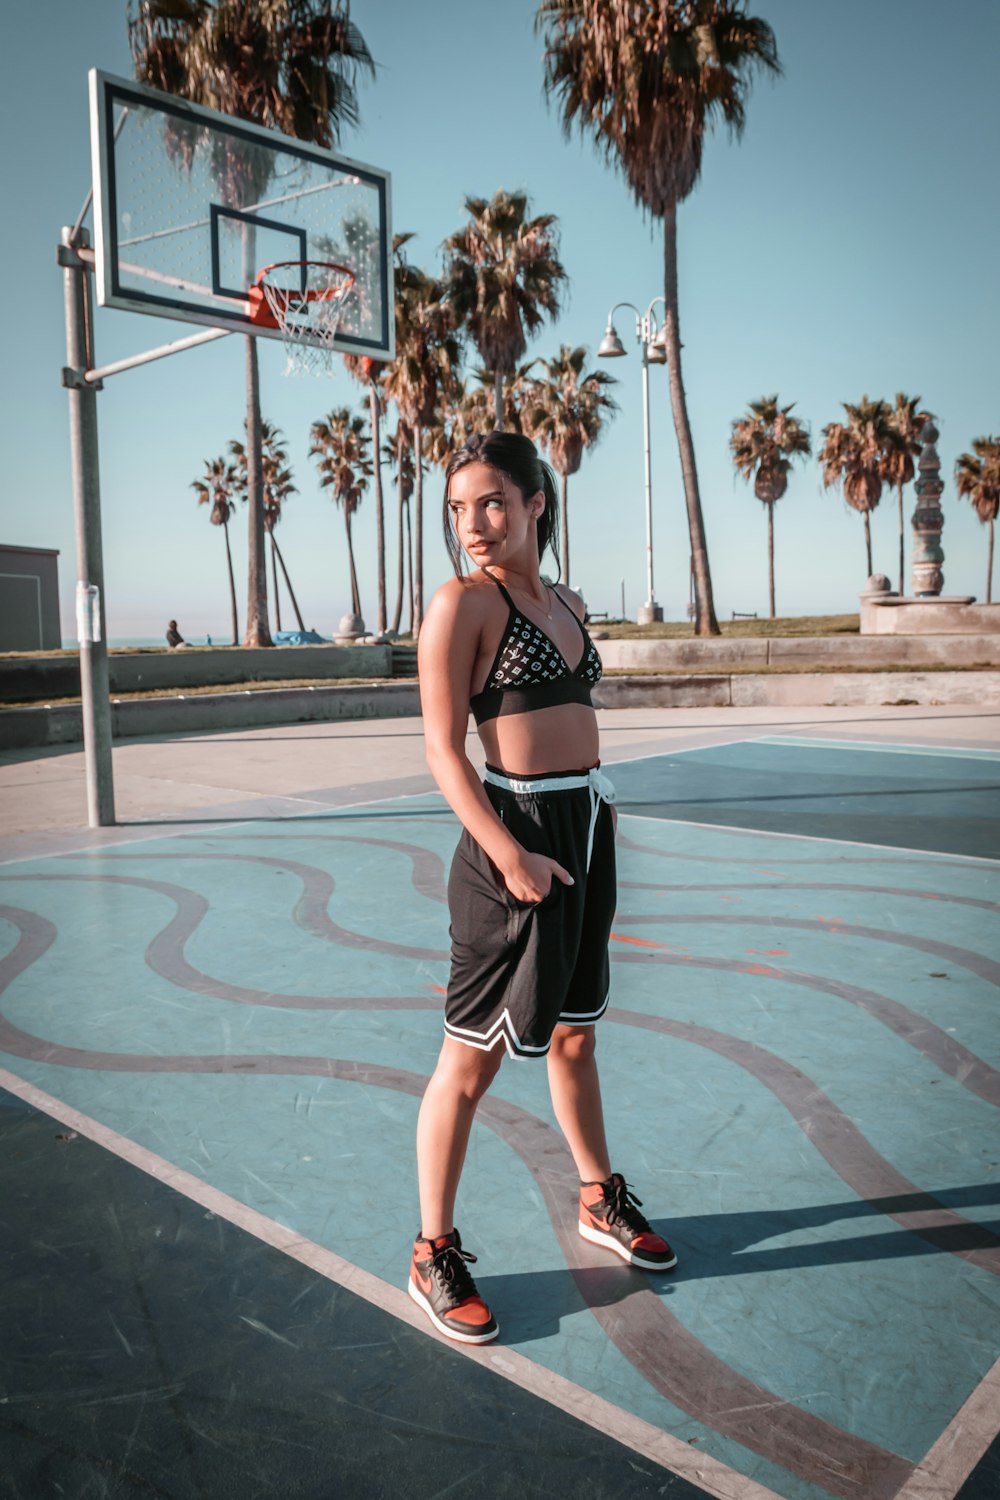 woman in black and white skirt standing on basketball court during daytime  photo – Free Los angeles Image on Unsplash